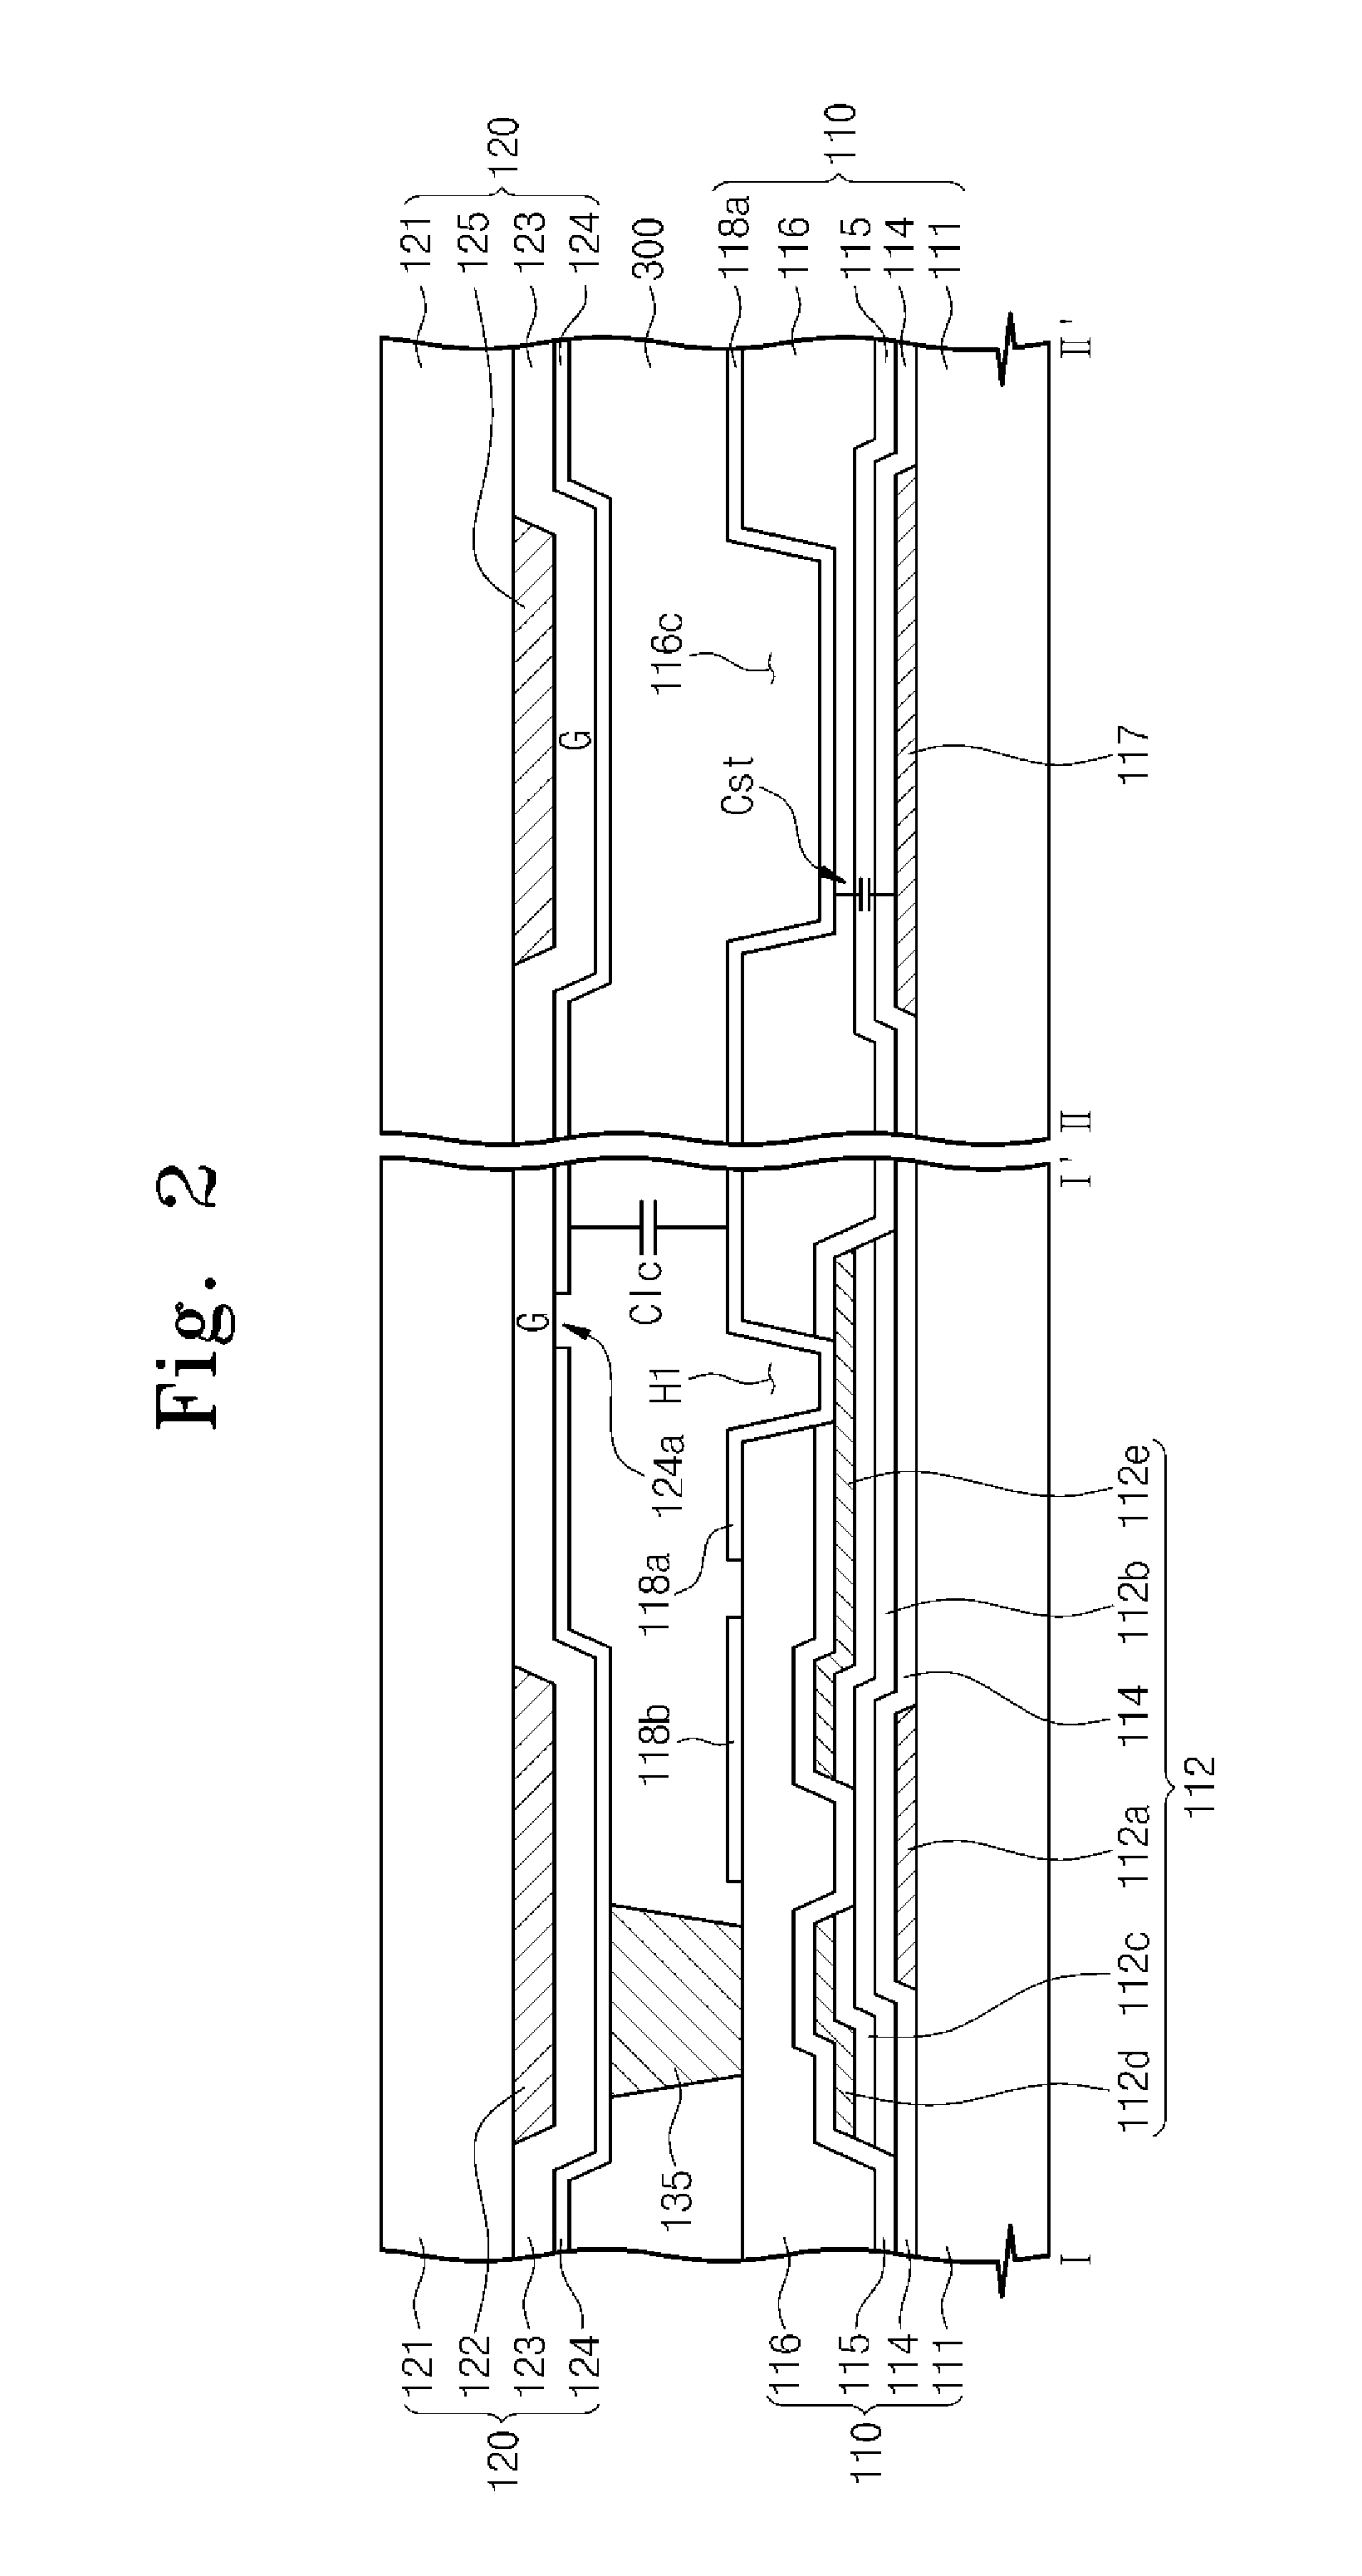 Display panel and method of manufacturing the same